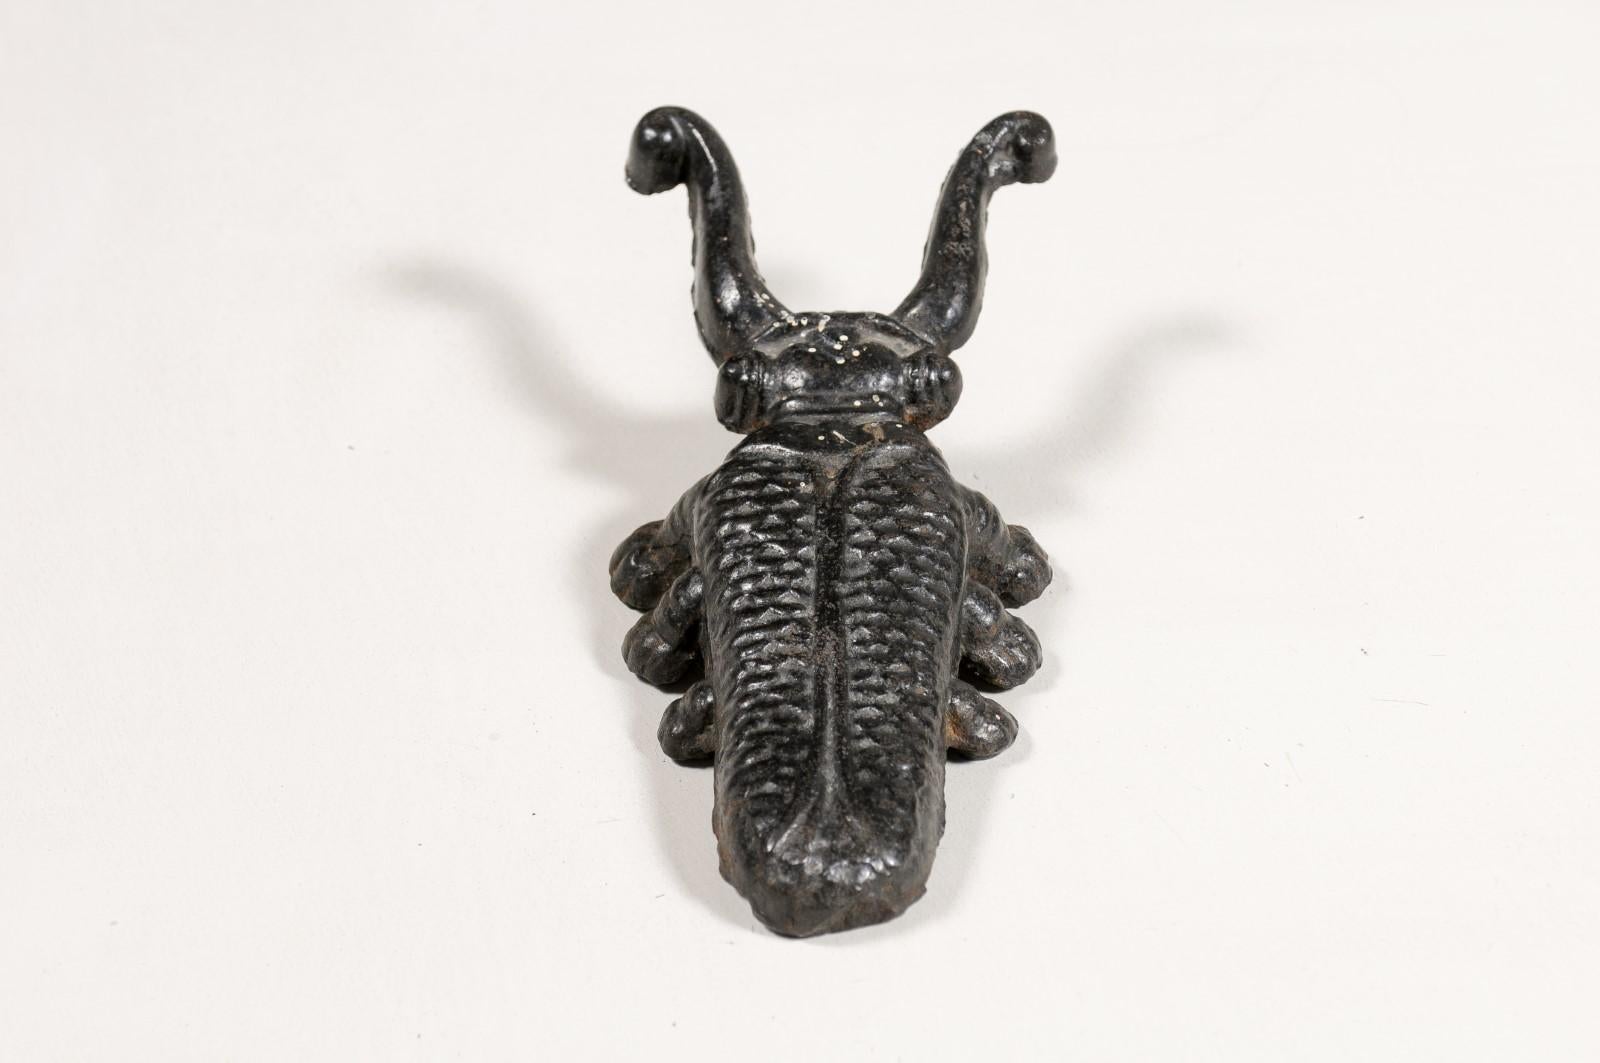 19th Century English Victorian Iron Bootjack Depicting a Cricket with Antennae 2